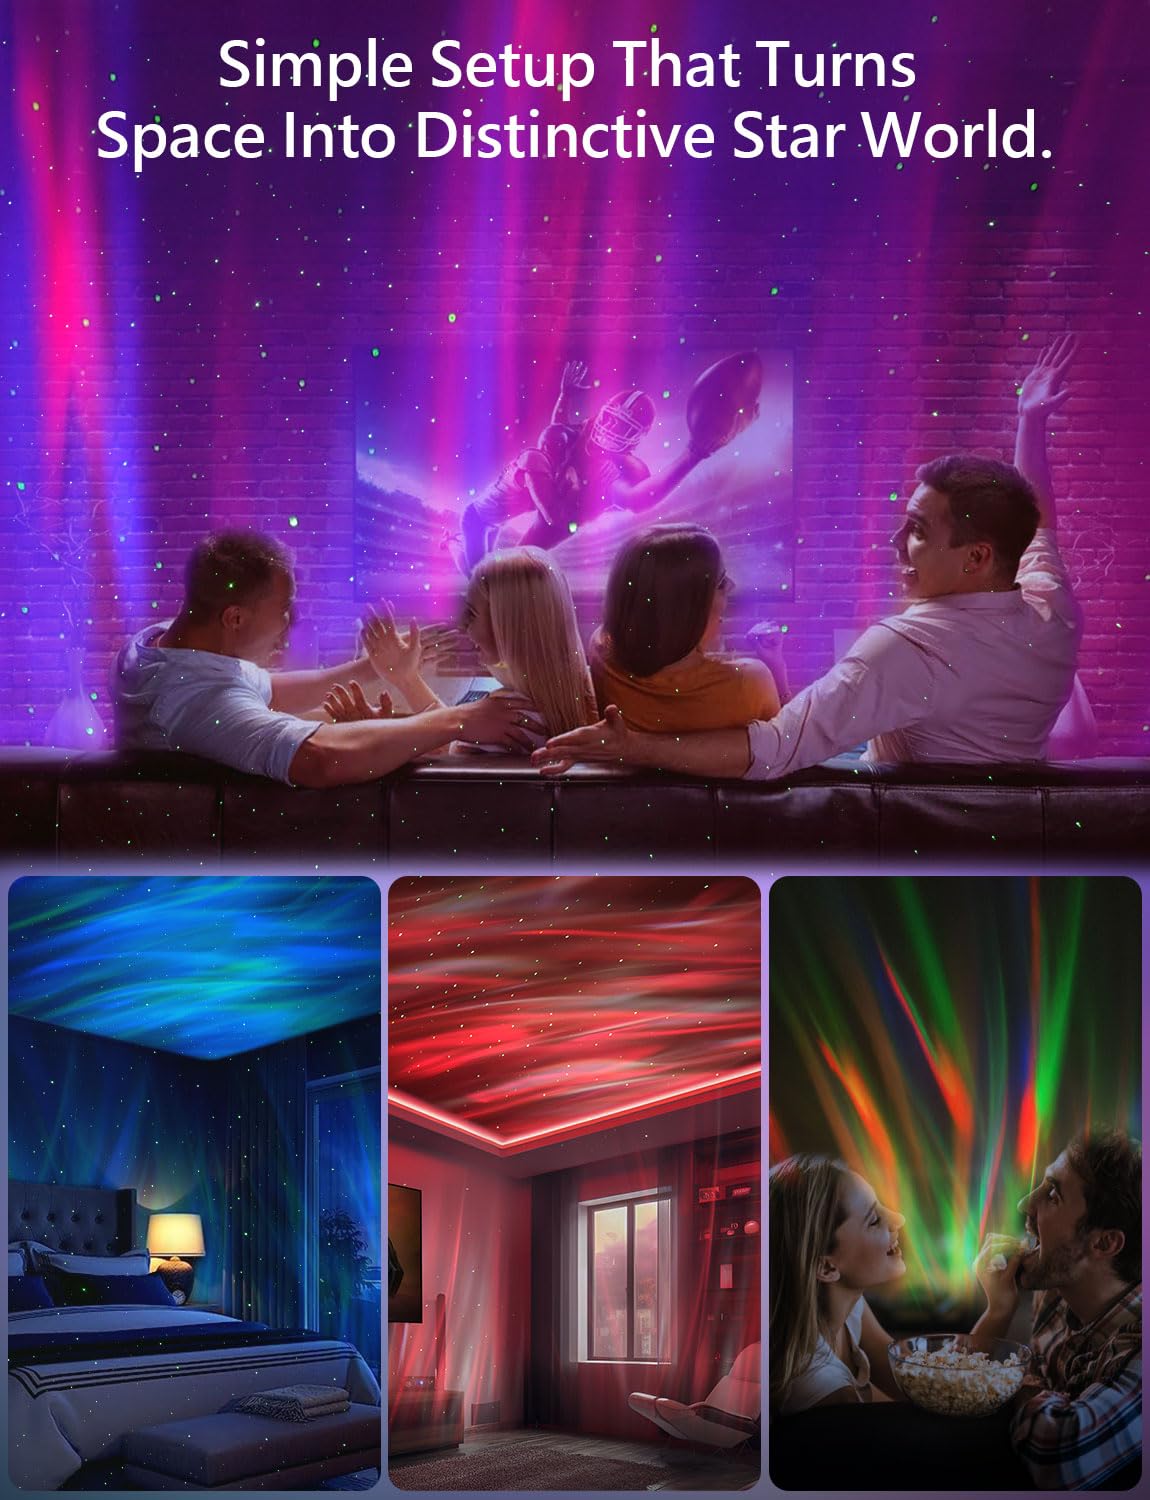 YOVAKO Star Projector, Night Light Projector with Music Speaker, Galaxy Projector with Remote Control, Aurora Projector with White Noise, Ceiling Projector Lights for Bedroom, Kids, Adults, Party